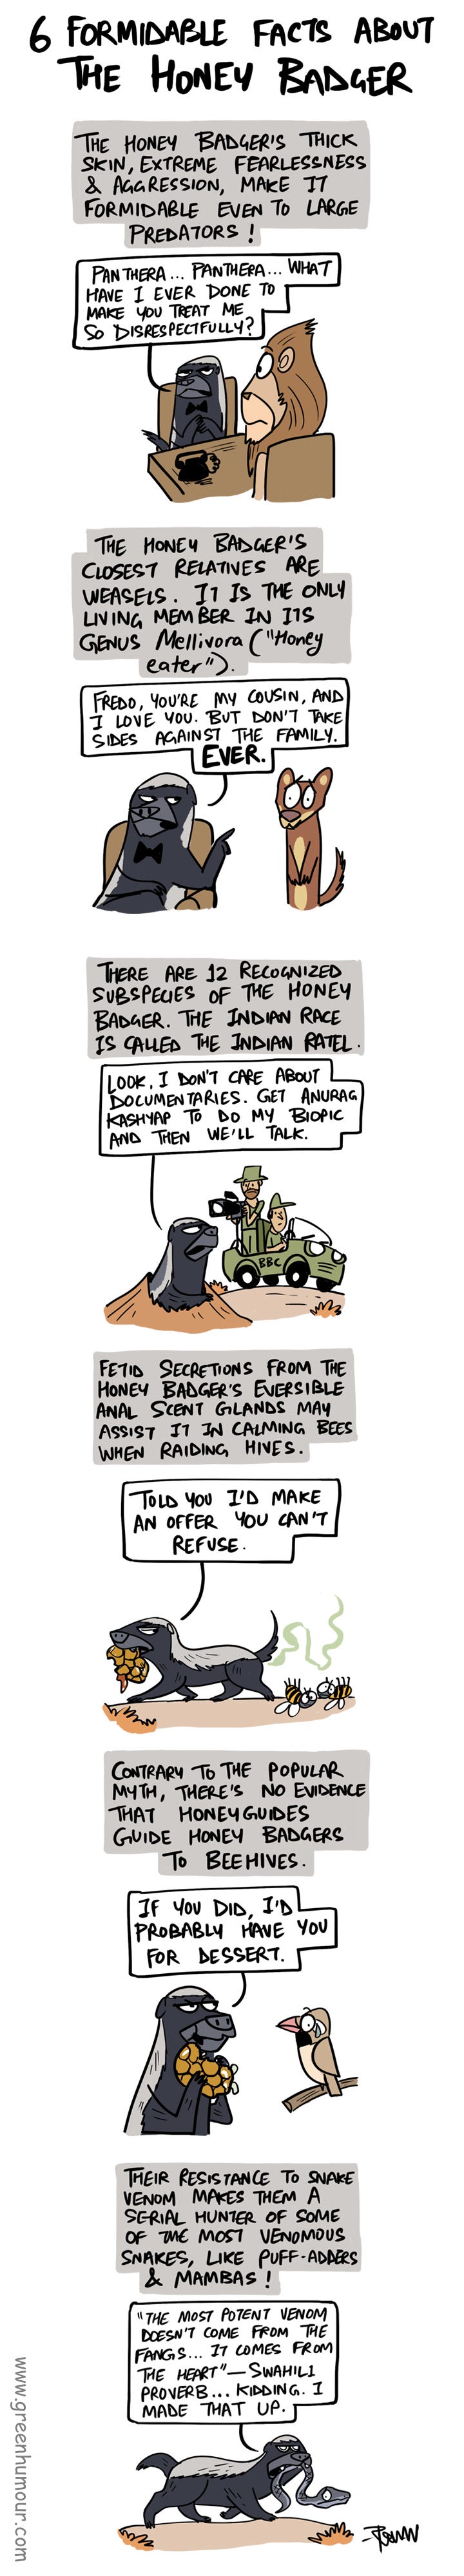 Green Humour: 6 Formidable Facts about the Honey Badger